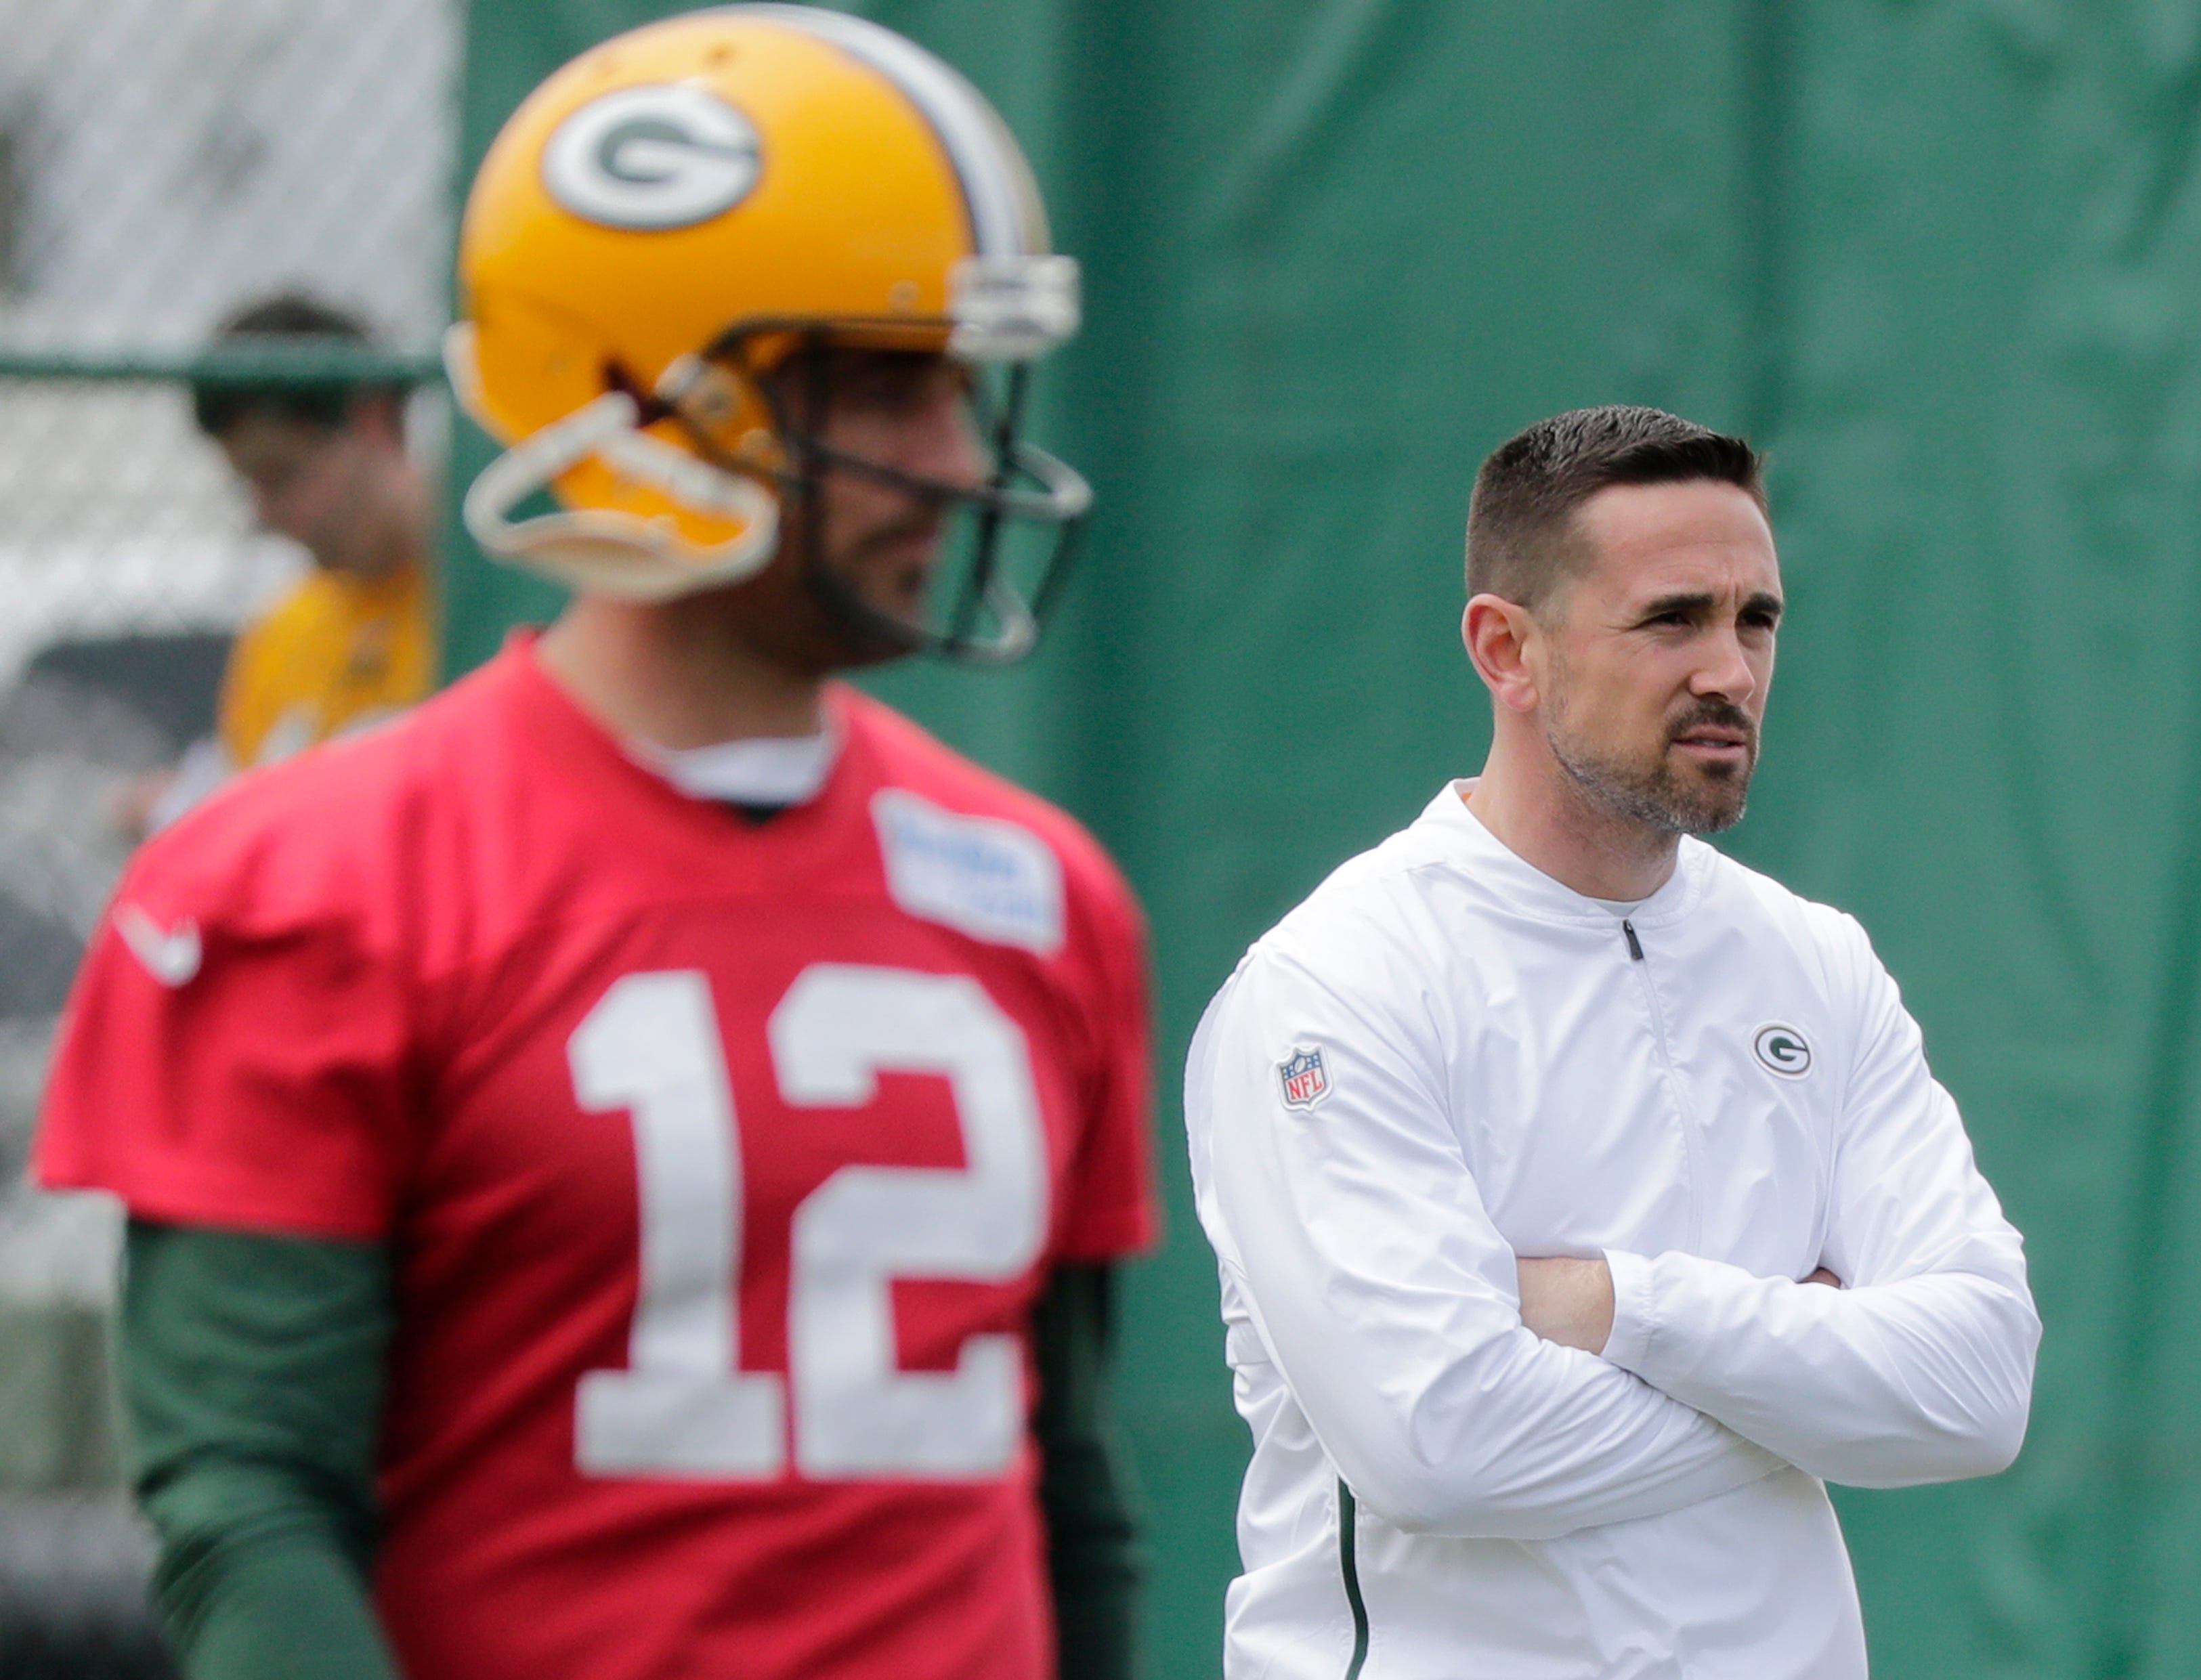 Green Bay Packers head coach Matt LaFleur and quarterback Aaron Rodgers (12) during practice at Clarke Hinkle Field on Tuesday, May 21, 2019 in Ashwaubenon, Wis.
Adam Wesley/USA TODAY NETWORK-Wis